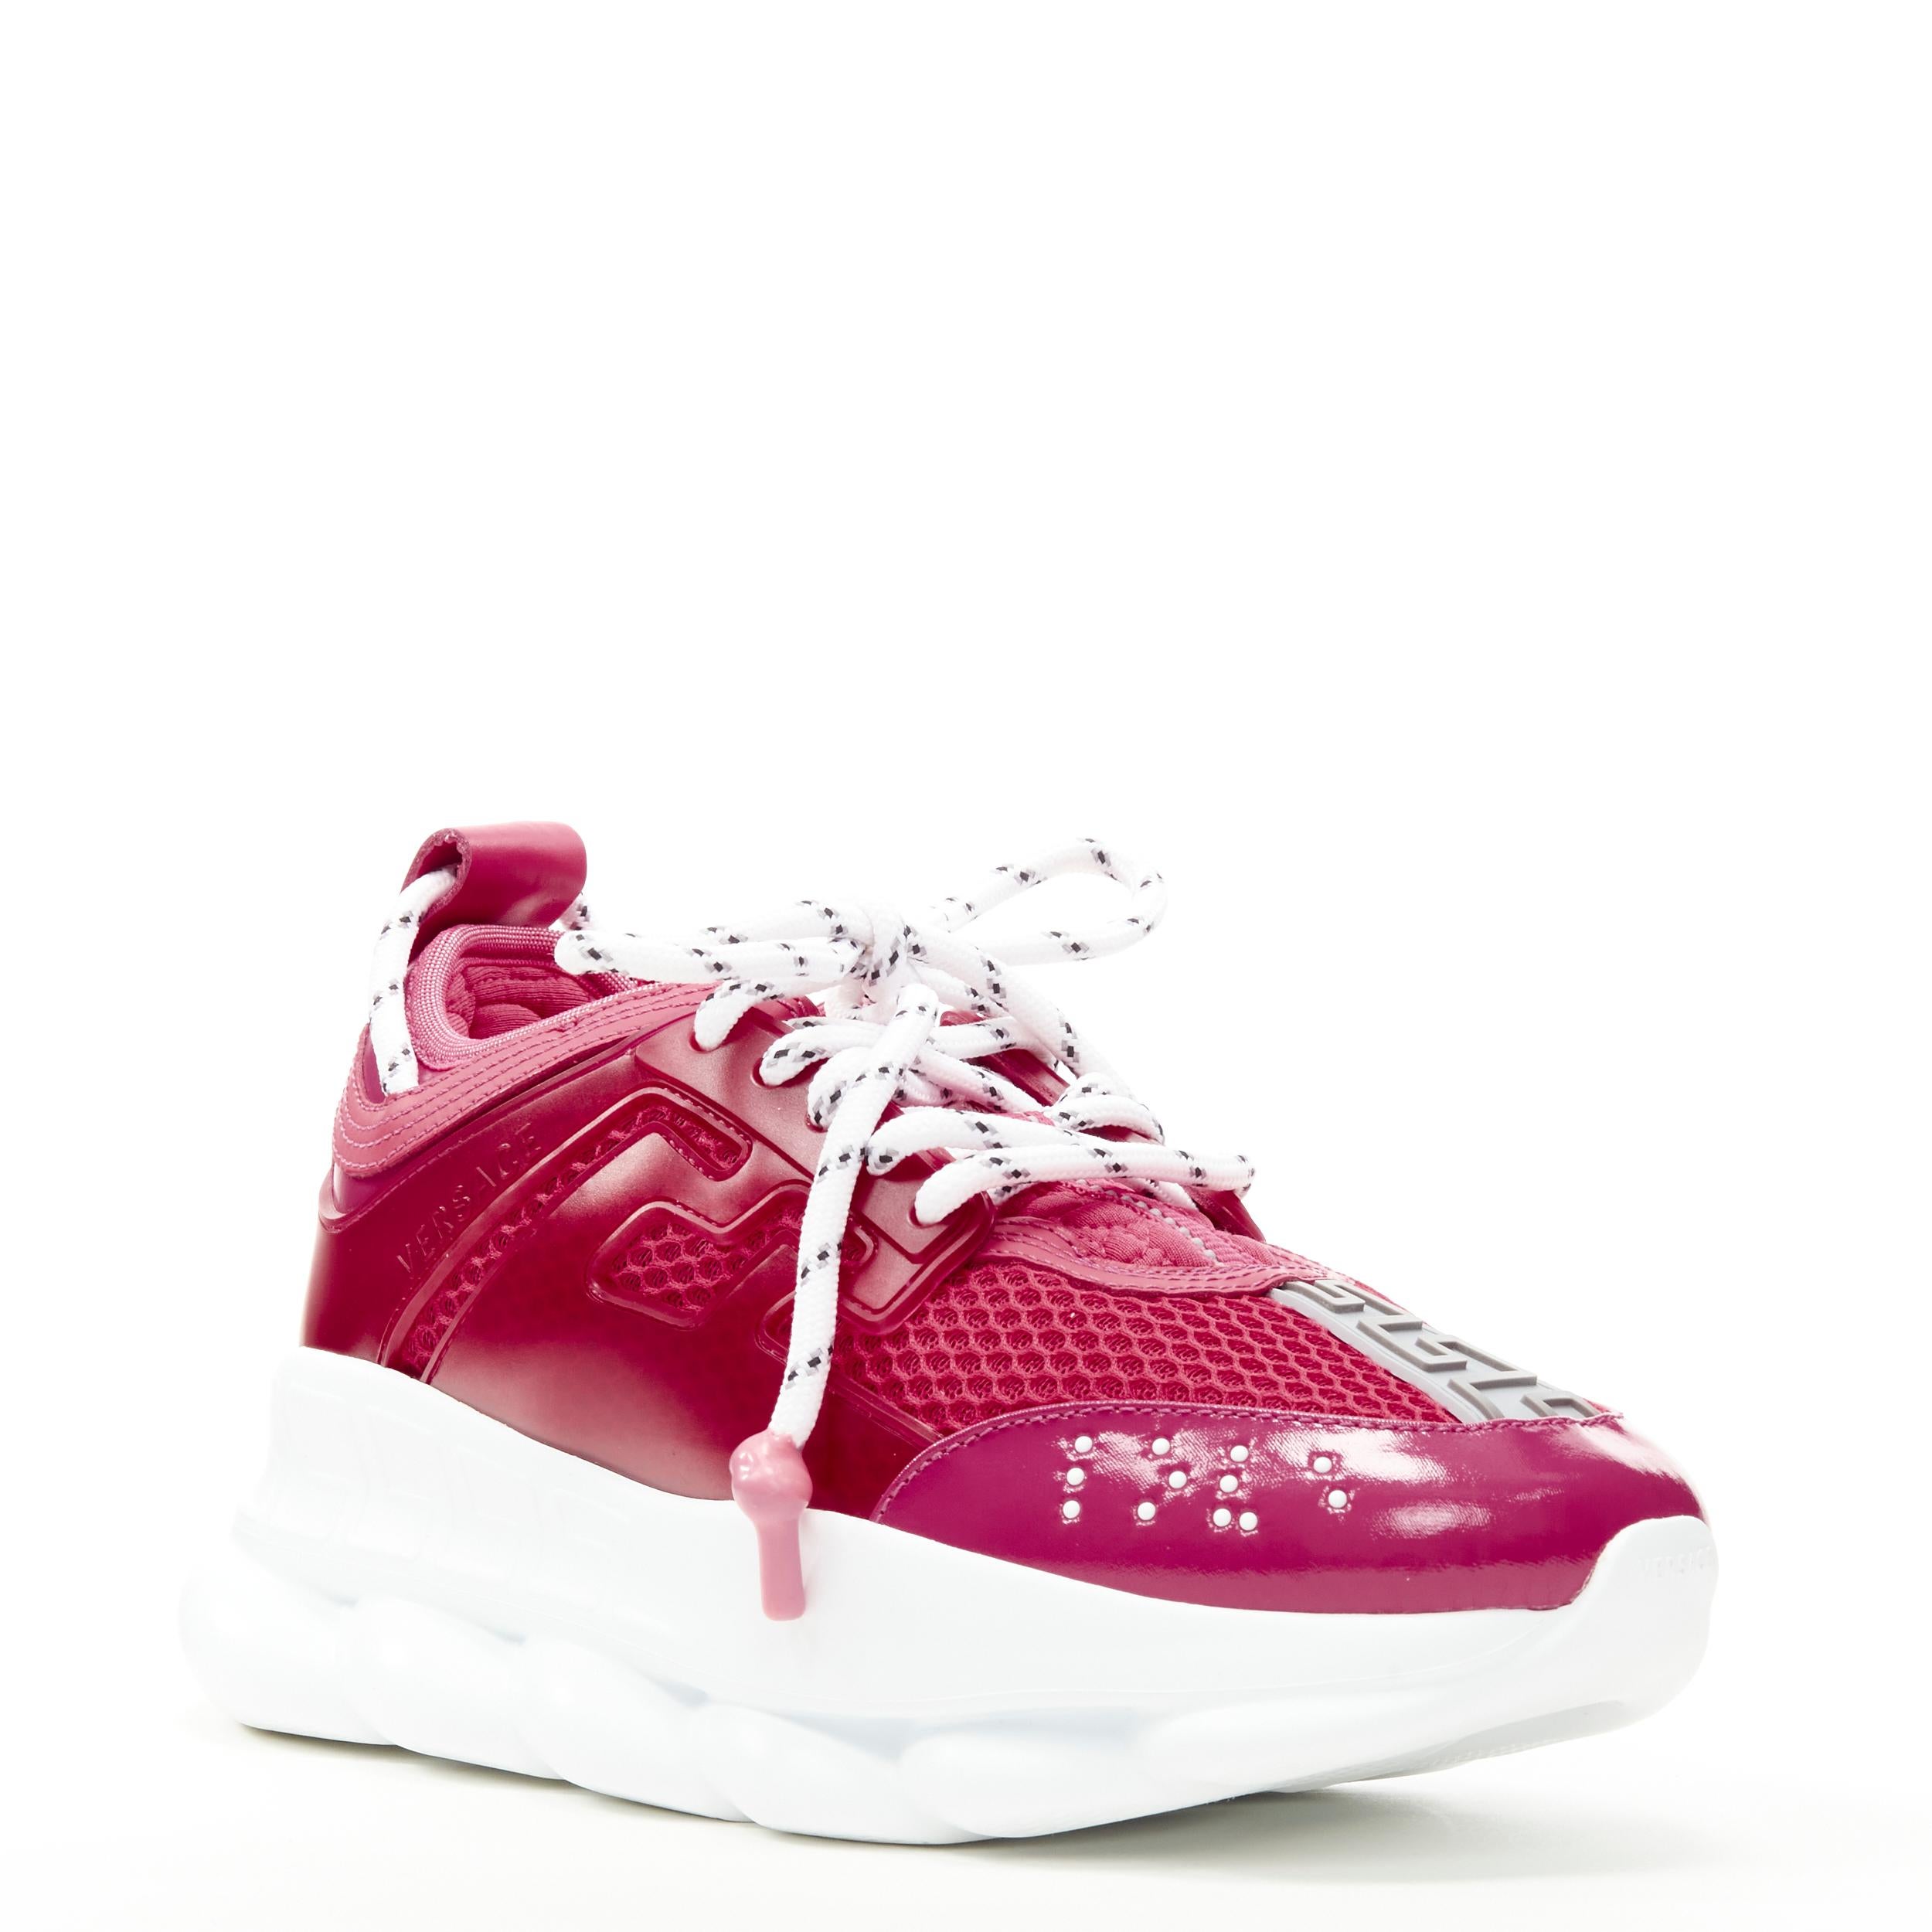 new VERSACE Chain Reaction fuschia pink white chunky sneaker EU38 US8 
Reference: TGAS/C00364 
Brand: Versace 
Designer: Donatella Versace 
Model: DSR705G D36TG K9R 
Collection: Chain Reaction 
Material: Fabric 
Color: Pink 
Pattern: Solid 
Closure: